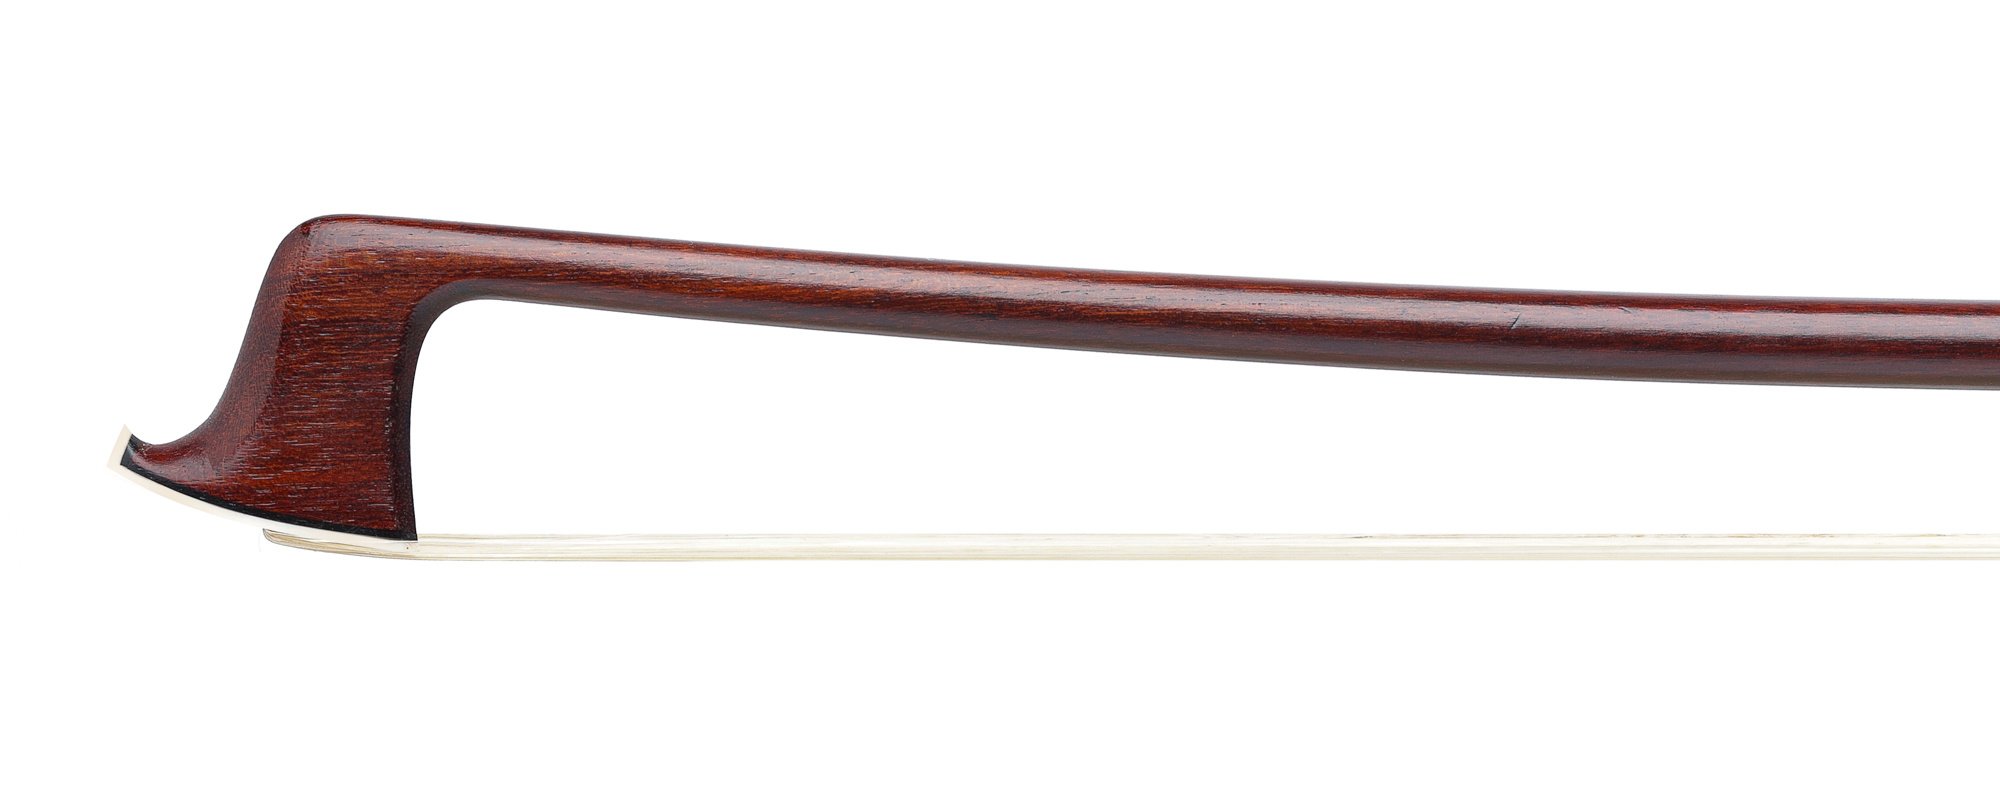 French Cuniot-Hury violin bow branded LUPOT, Mirecourt, FRANCE, with Raffin certificate of authenticity